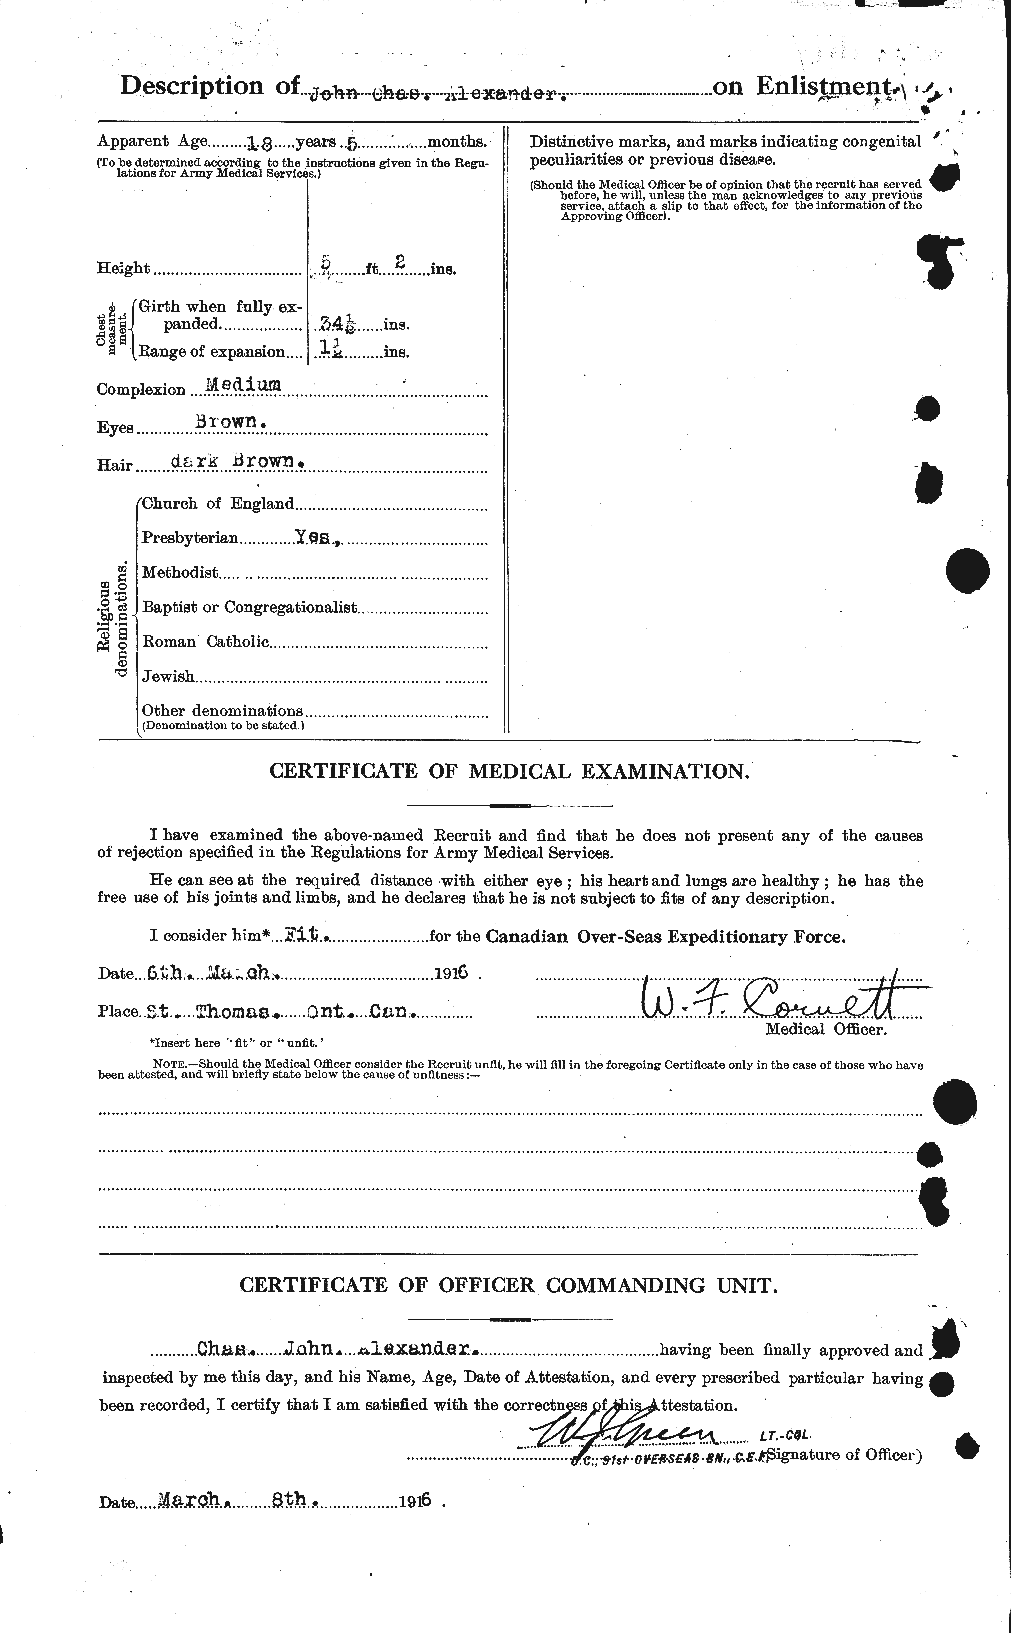 Personnel Records of the First World War - CEF 204267b